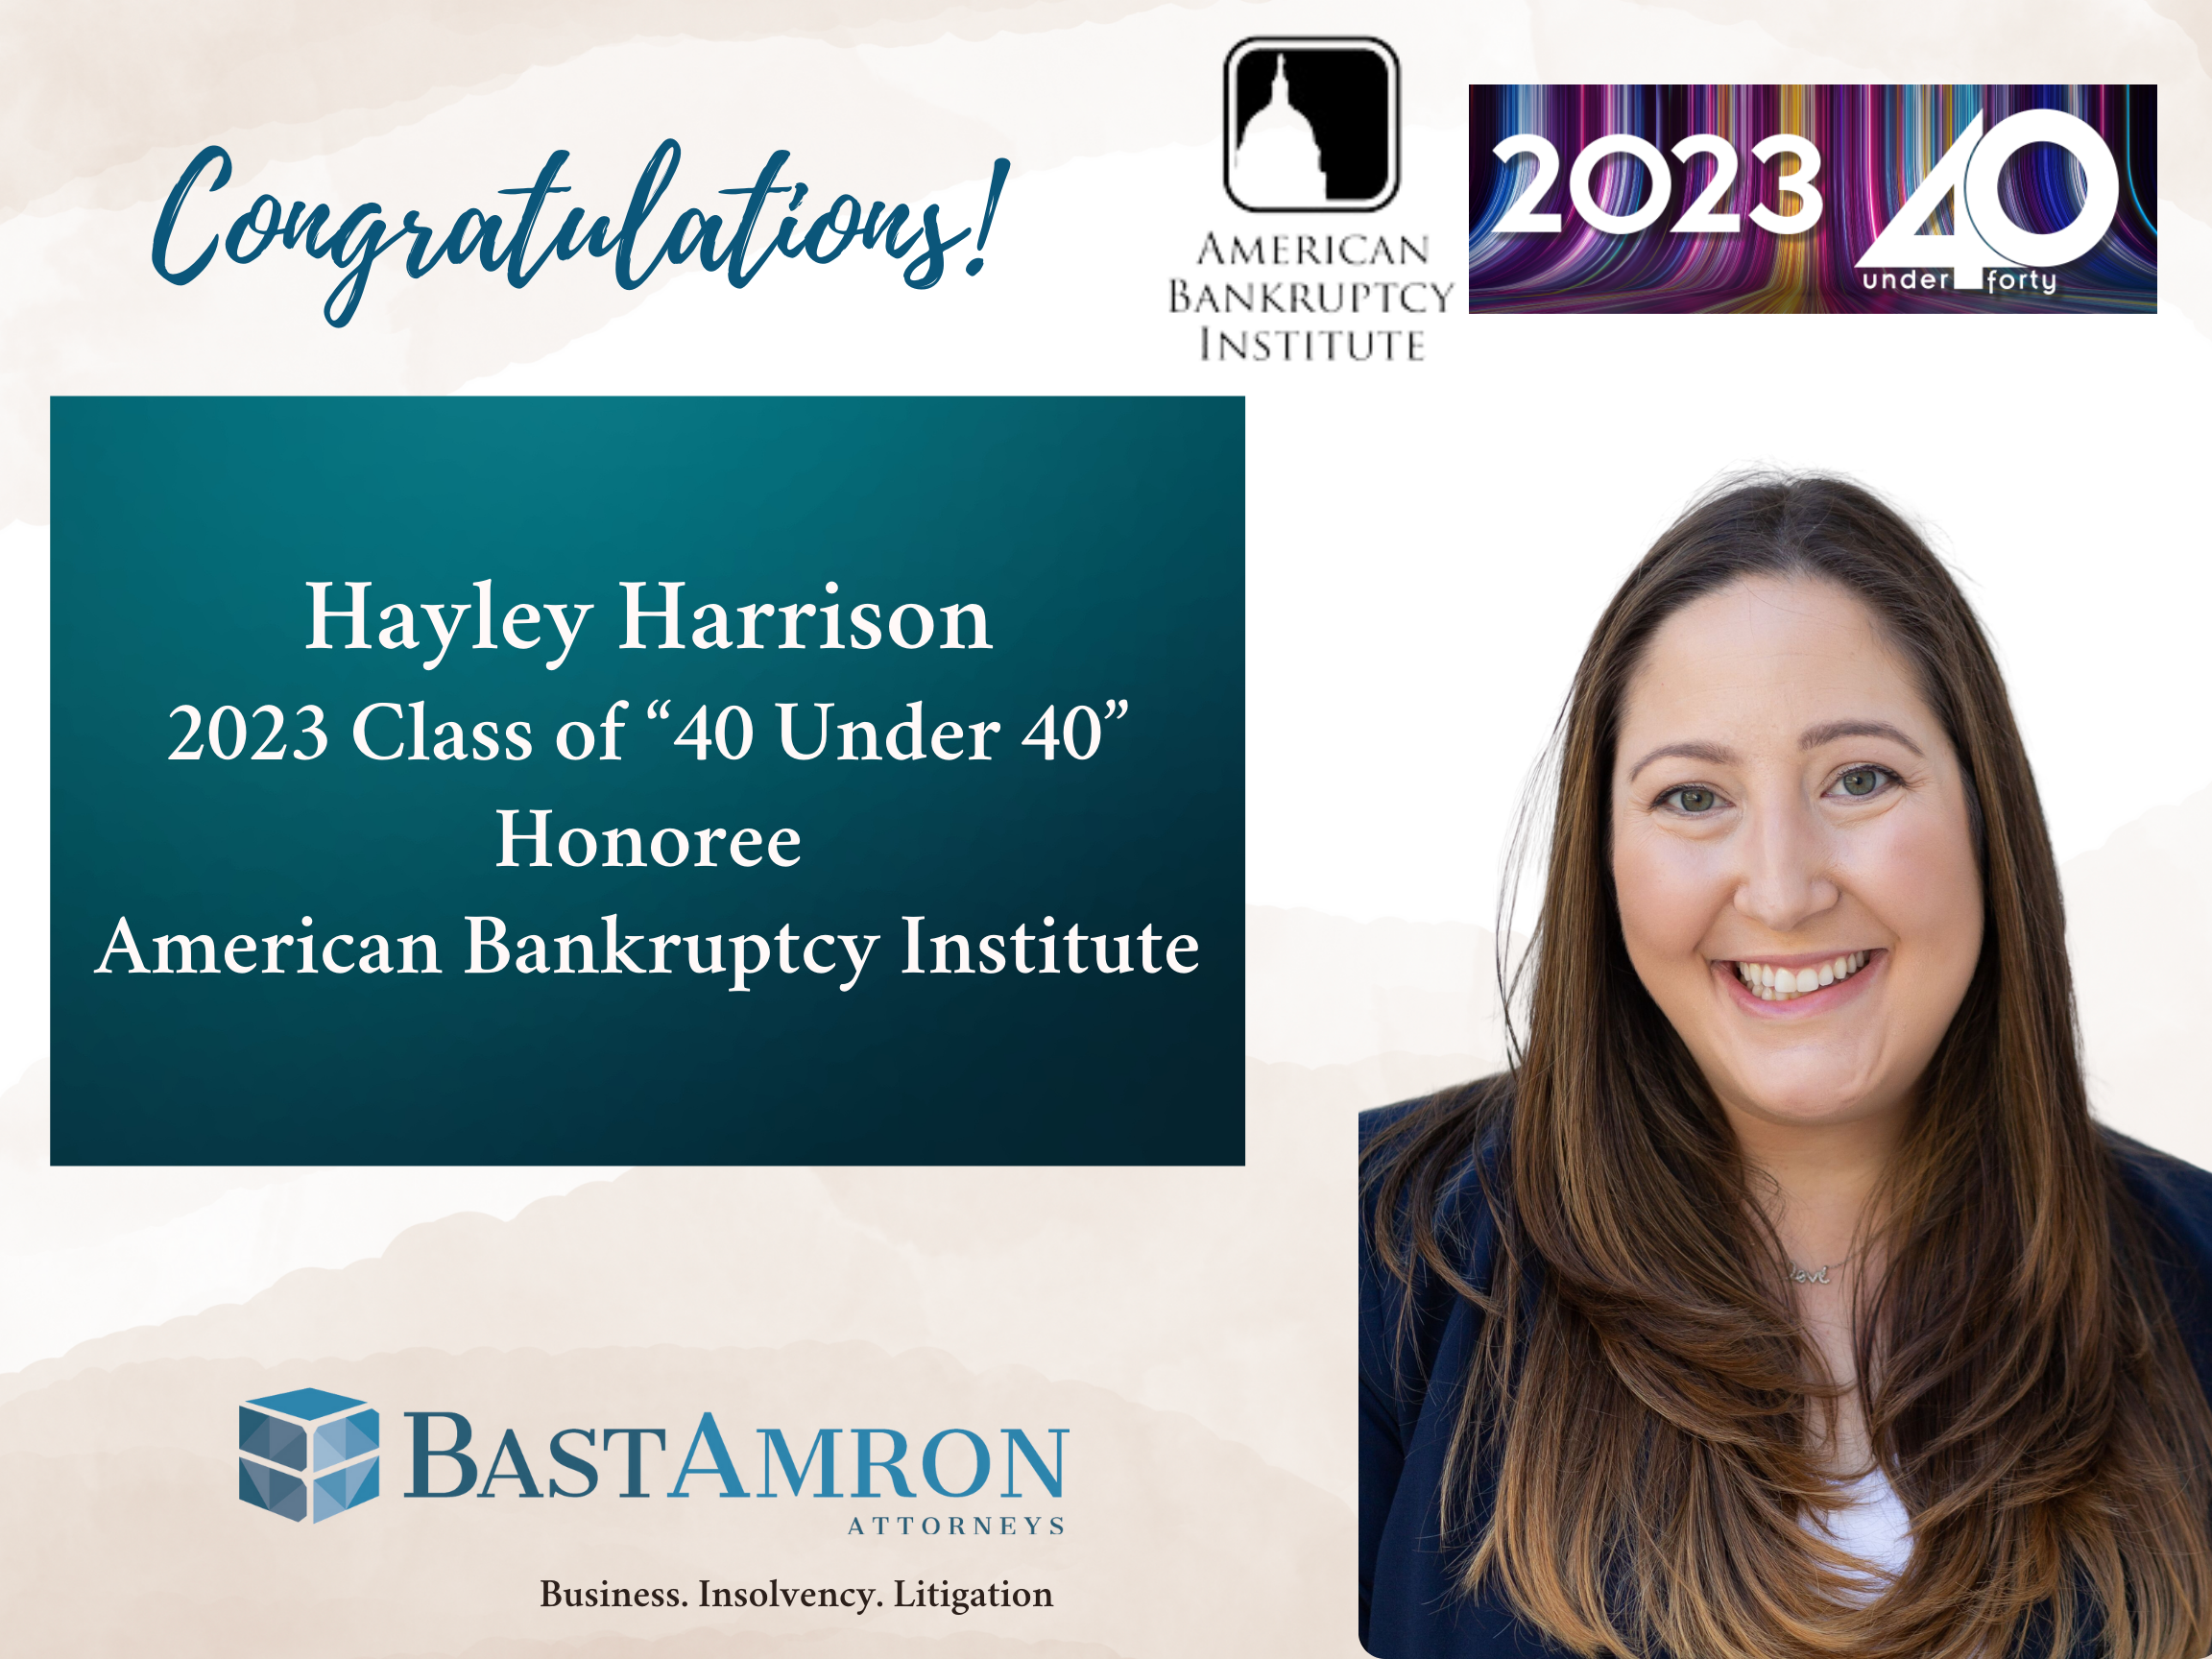 BAST AMRON ATTORNEY HAYLEY HARRISON, NAMED AS HONOREE TO ABI’S 2023 CLASS OF 40 UNDER 40